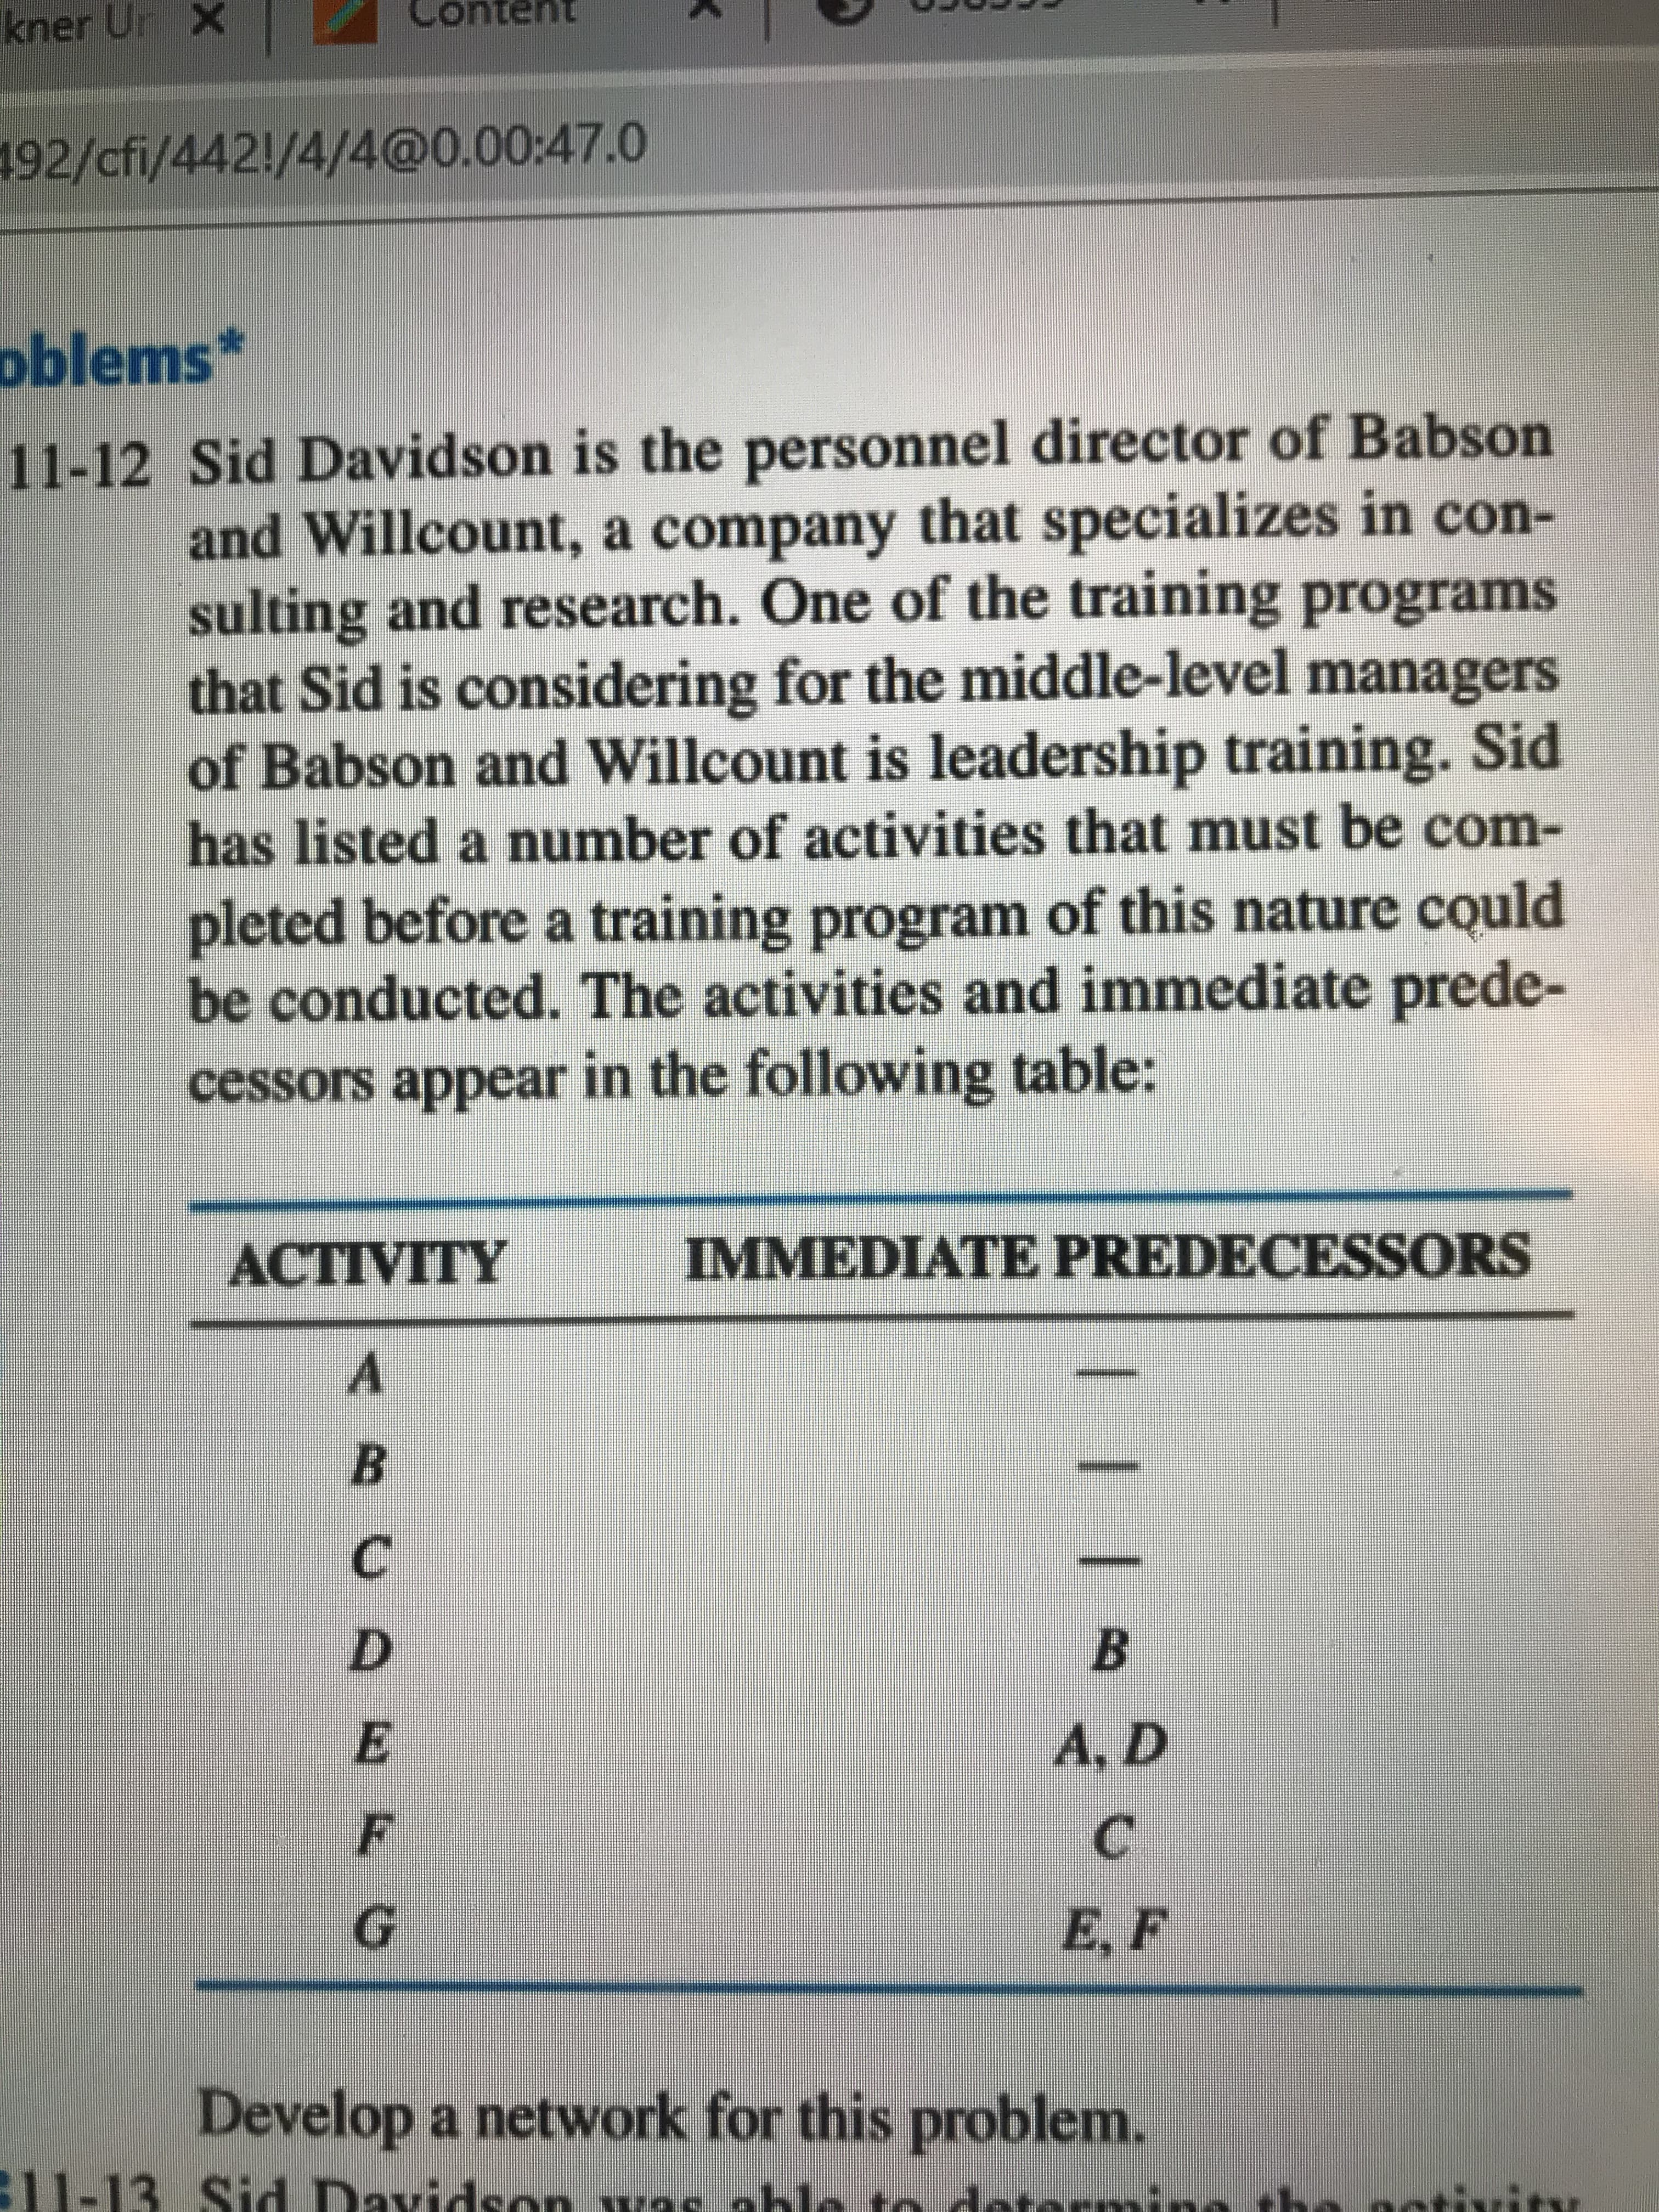 kner Ur X
Content
192/cfi/442!/4/4@0.00:47.0
oblems*
11-12 Sid Davidson is the personnel director of Babson
and Willcount, a company that specializes in con-
sulting and research. One of the training programs
that Sid is considering for the middle-level managers
of Babson and Willcount is leadership training. Sid
has listed a number of activities that must be com-
pleted before a training program of this nature could
be conducted. The activities and immediate prede-
cessors appear in the following table:
ACTIVITY
IMMEDIATE PREDECESSORS
C.
А, D
G.
E, F
Develop a network for this problem.
E11-13 Sid Davidson was able to determing theactivity
